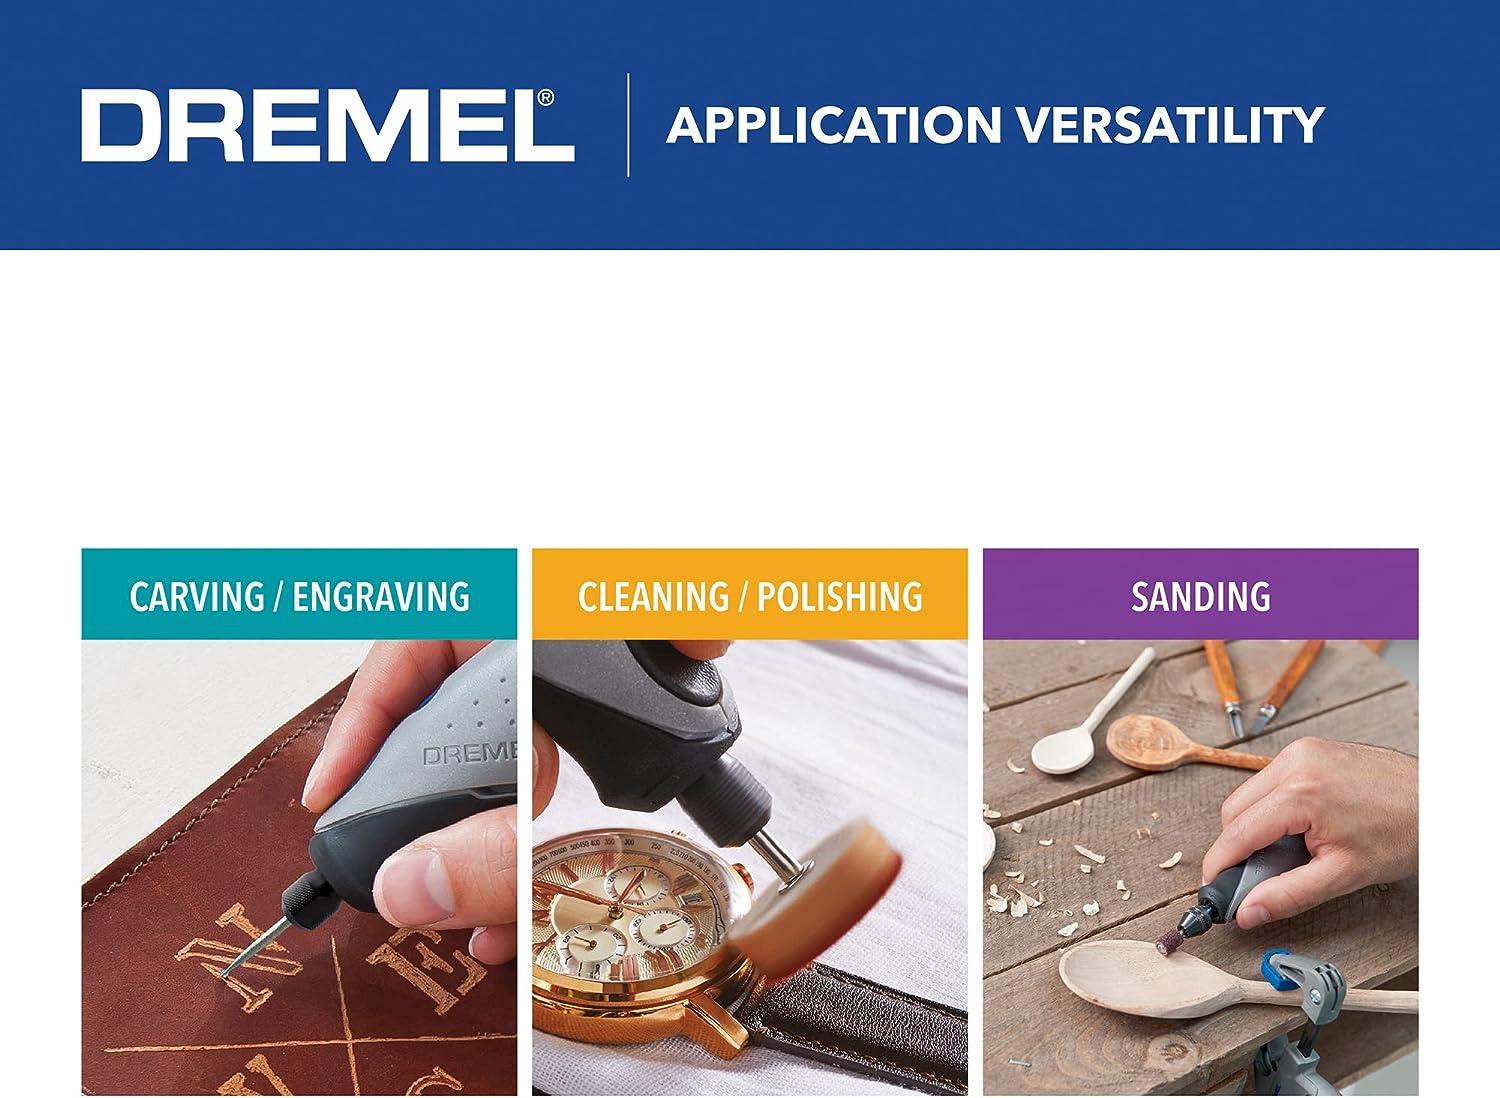 Dremel 2050-15 Stylo+ Versatile Craft Rotary Tool Wood Carving Detail Tool  Perfect for Glass Etching Leather Burnishing Jewelry Making Polishing  Woodworking and More Craft Projects Gray 15-Piece Kit Original Kit